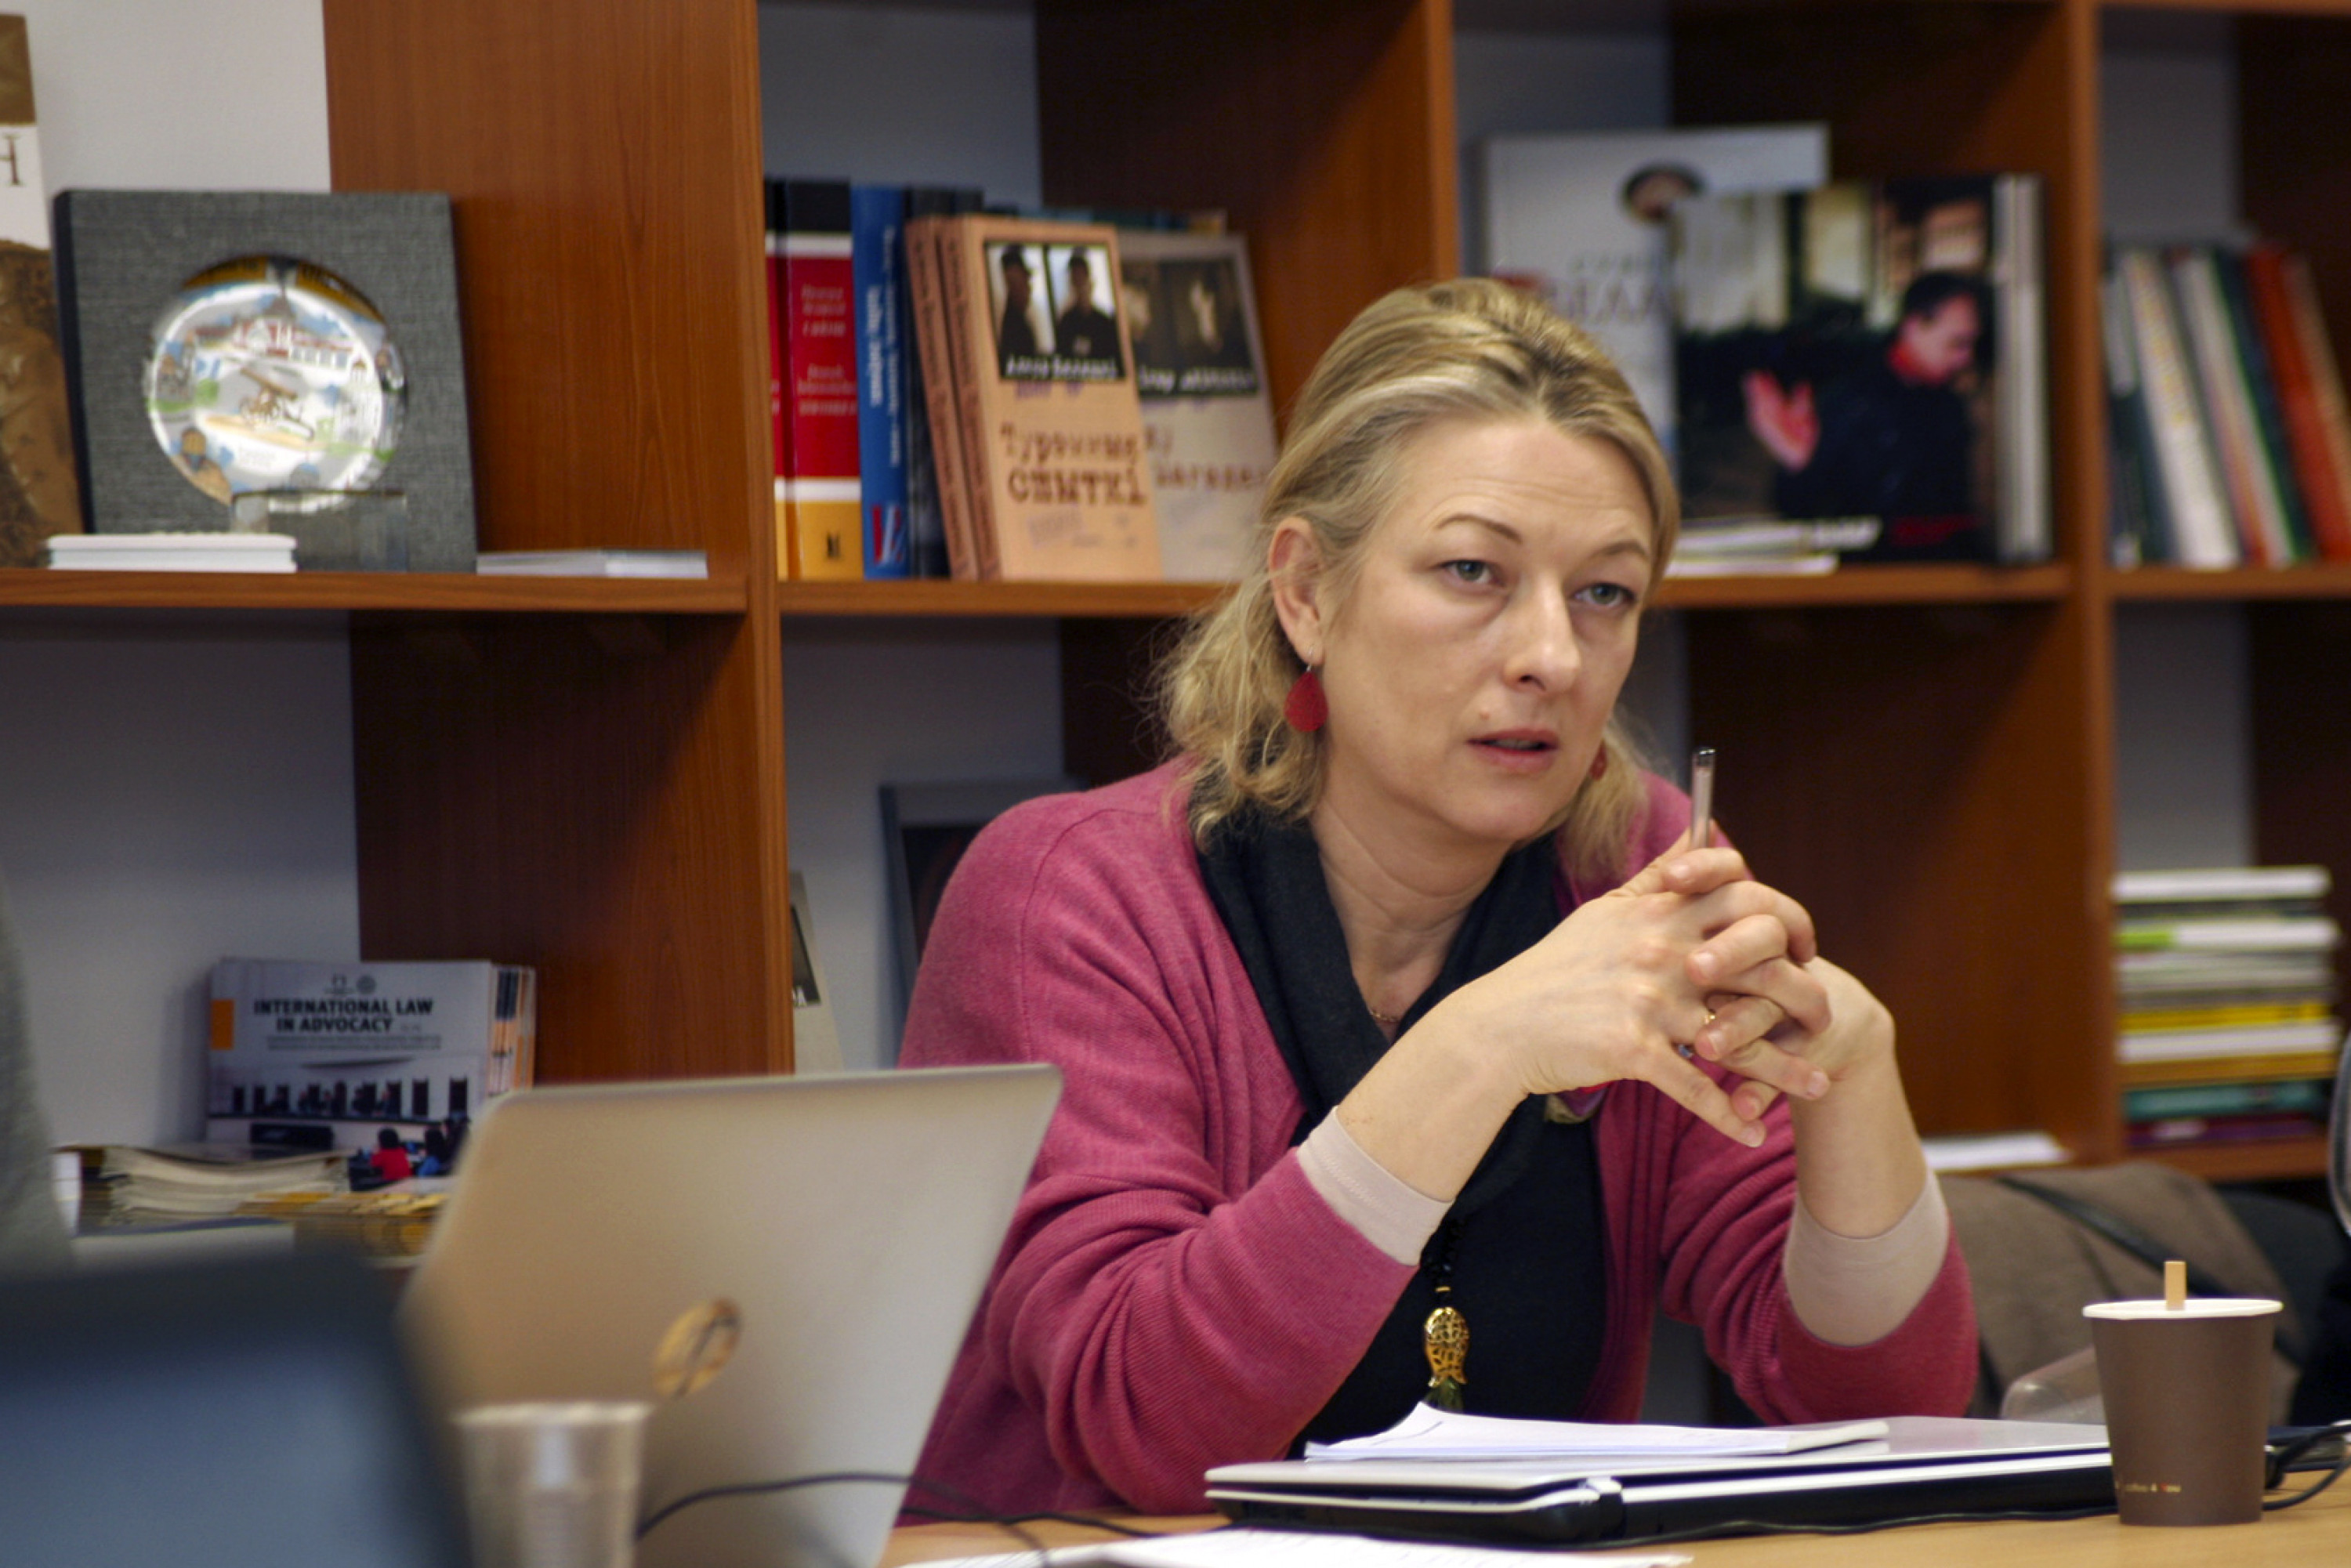 Anaïs Marin, UN Special Rapporteur on the situation of human rights in Belarus